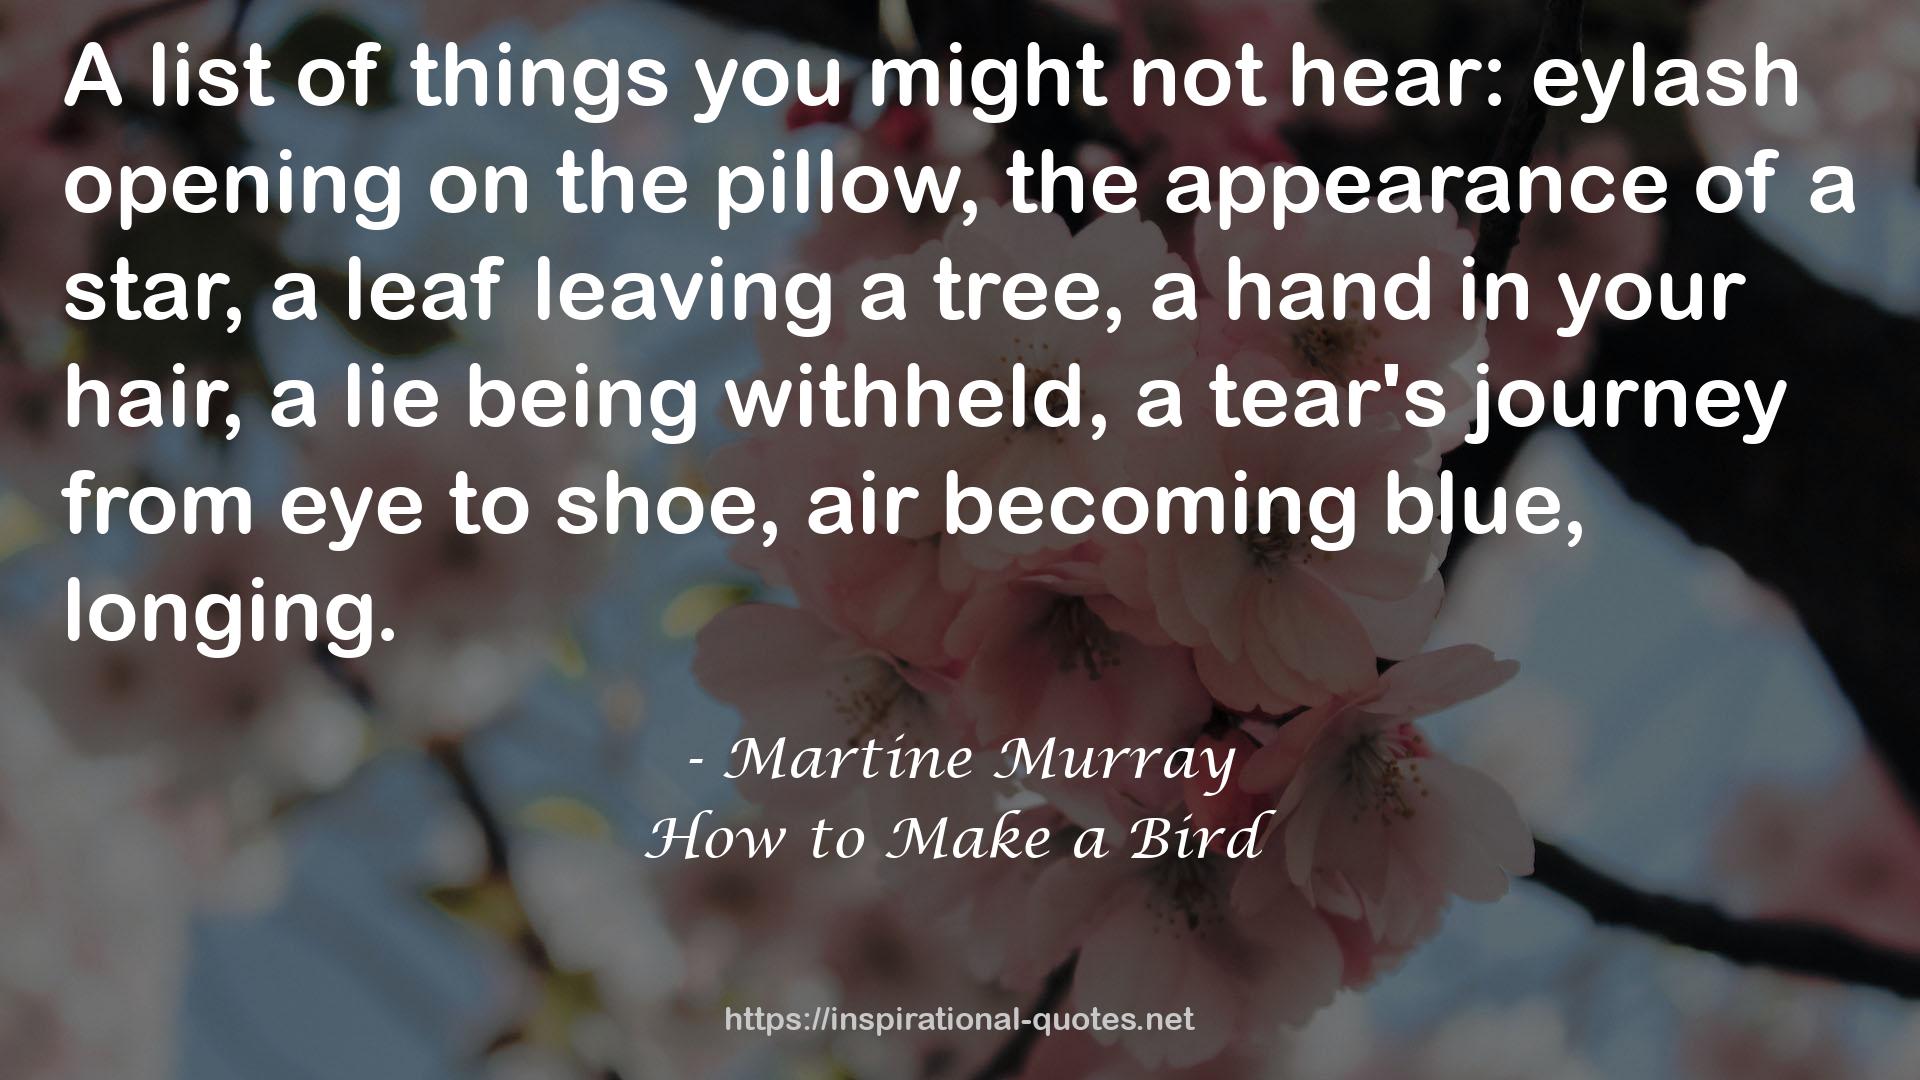 Martine Murray QUOTES